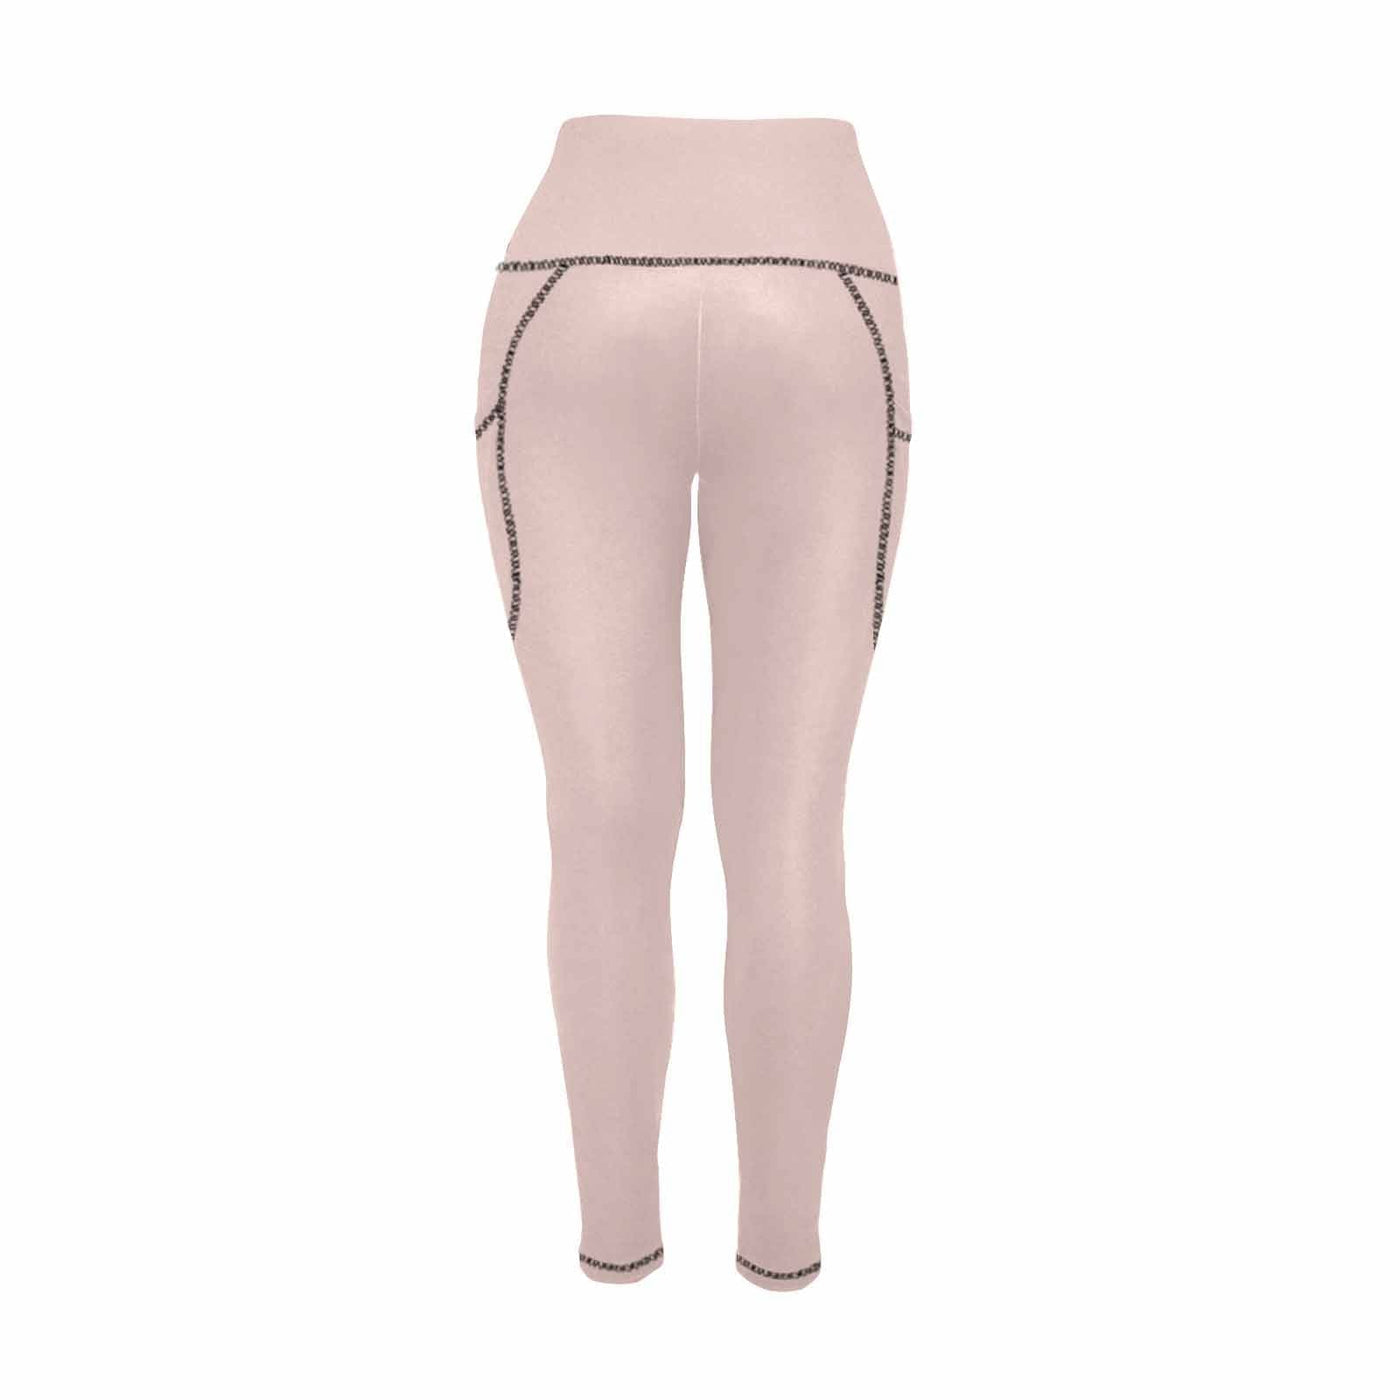 Womens Leggings With Pockets - Fitness Pants / Scallop Seashell Pink - Womens